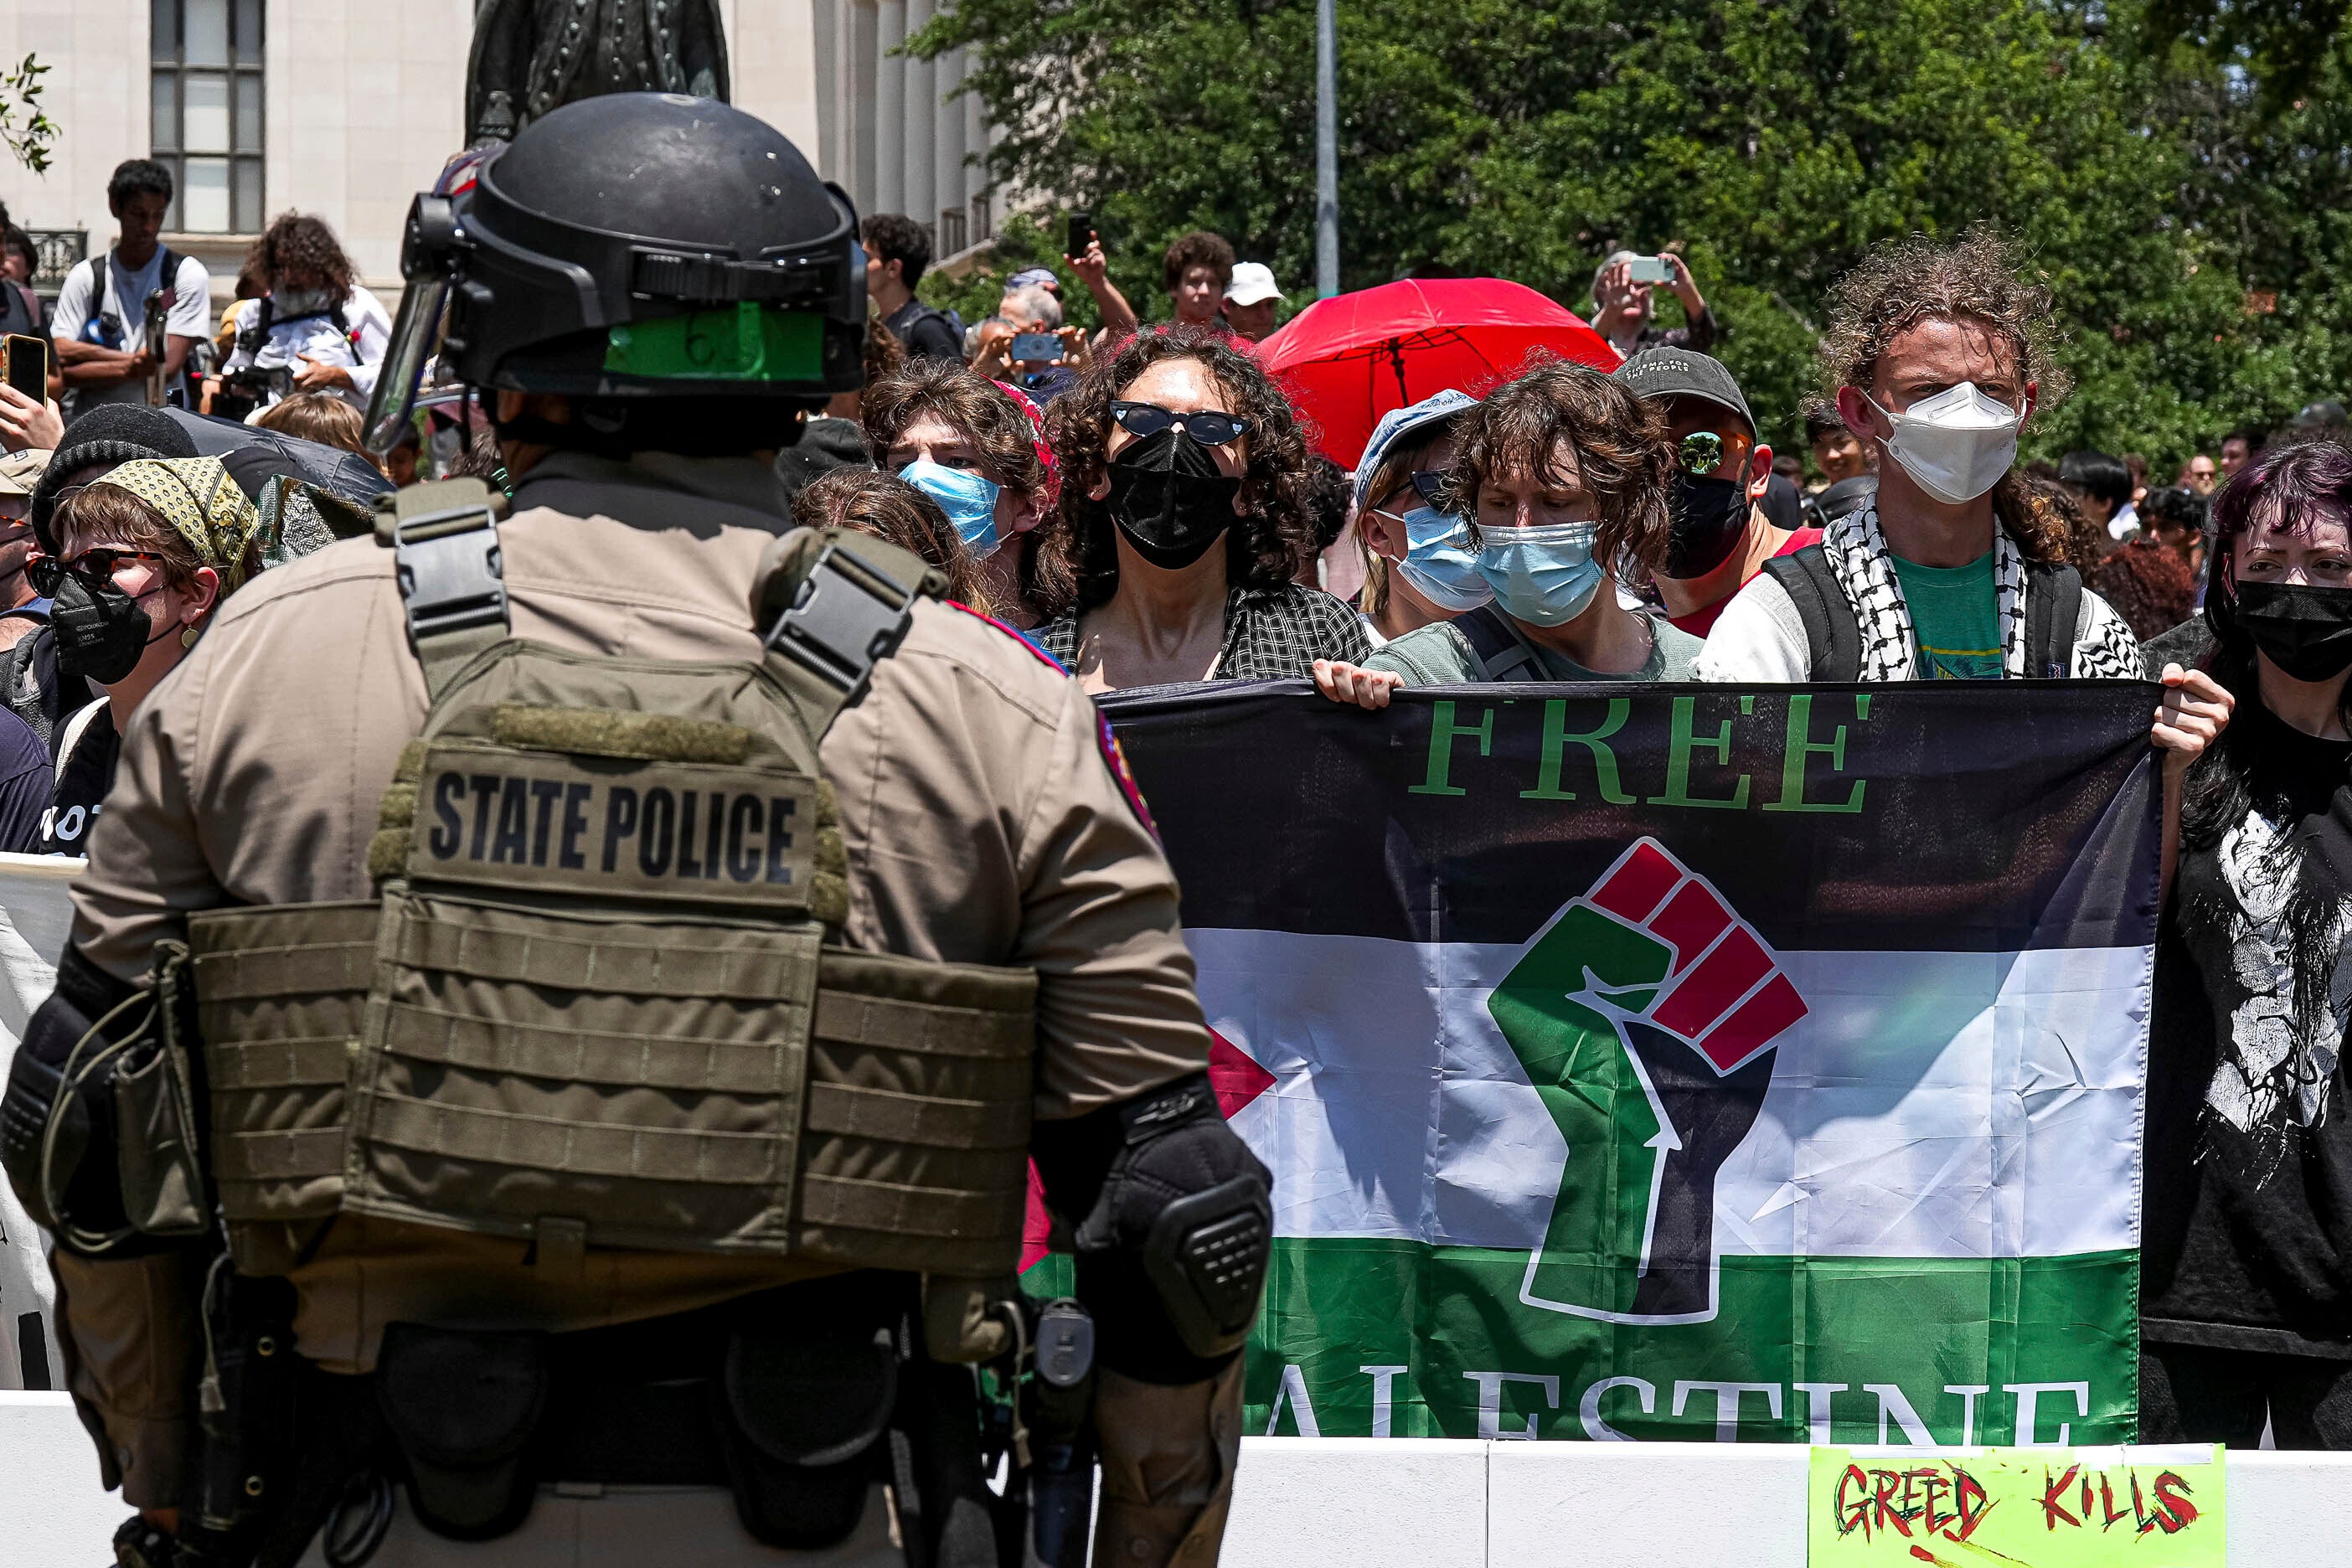 Pro-Palestinian protesters stand with linked arms surrounded by Texas state troopers and police at an encampment at the University of Texas, Austin on 29 April. Officials have made dozens of arrests at the school in recent days